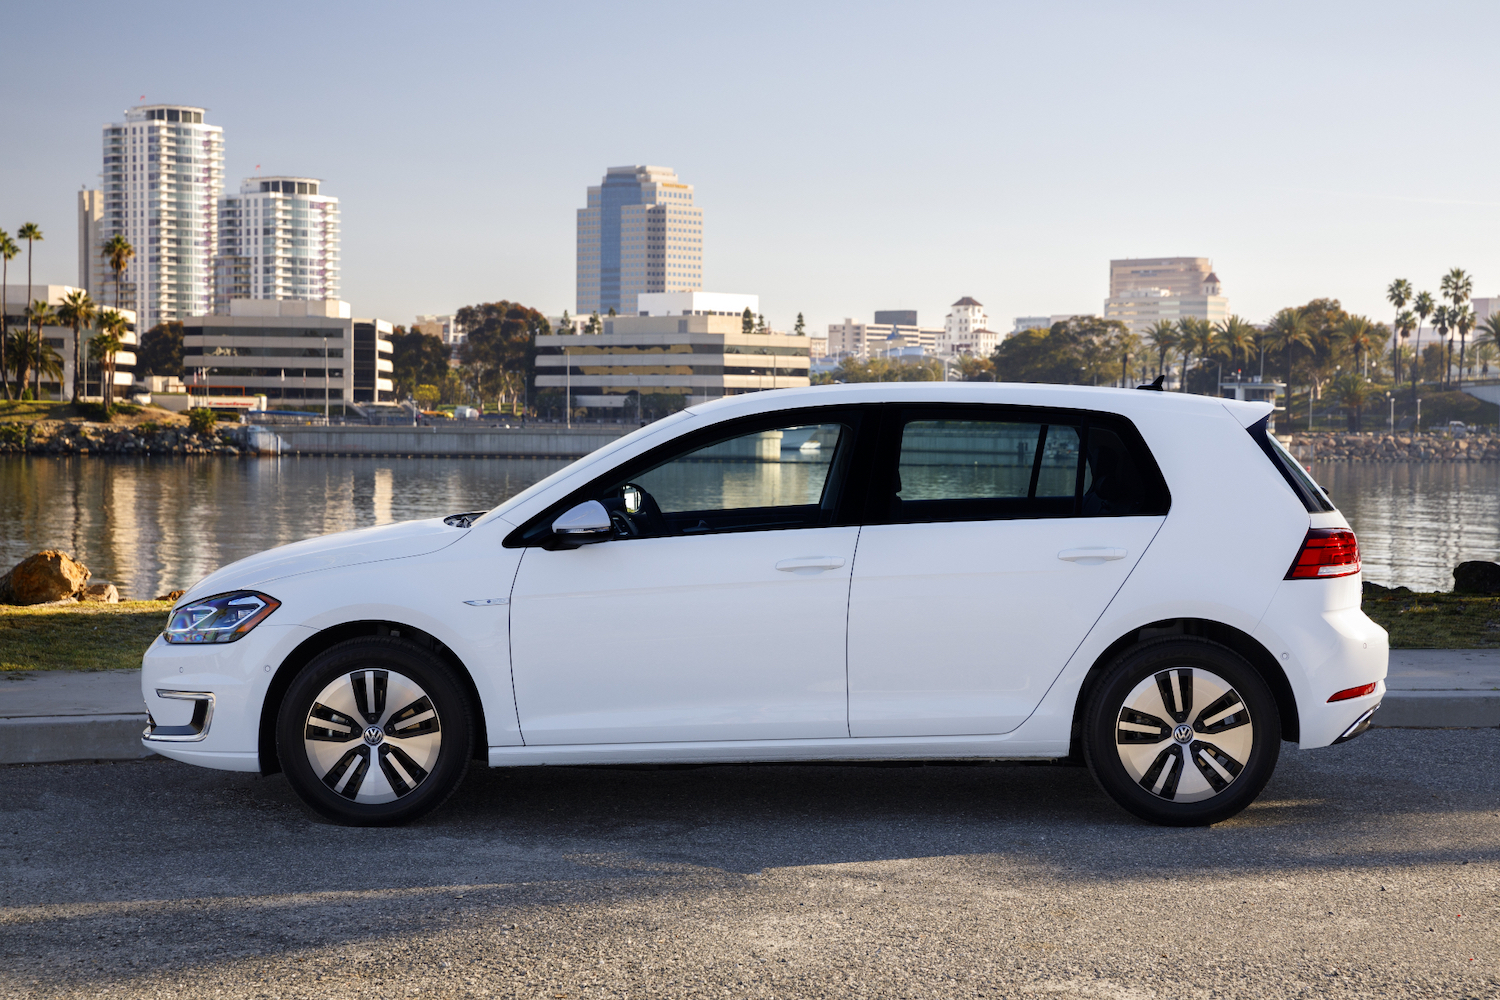 Side profile of 2017 Volkswagen e-Golf parked in front of tall city buildings.